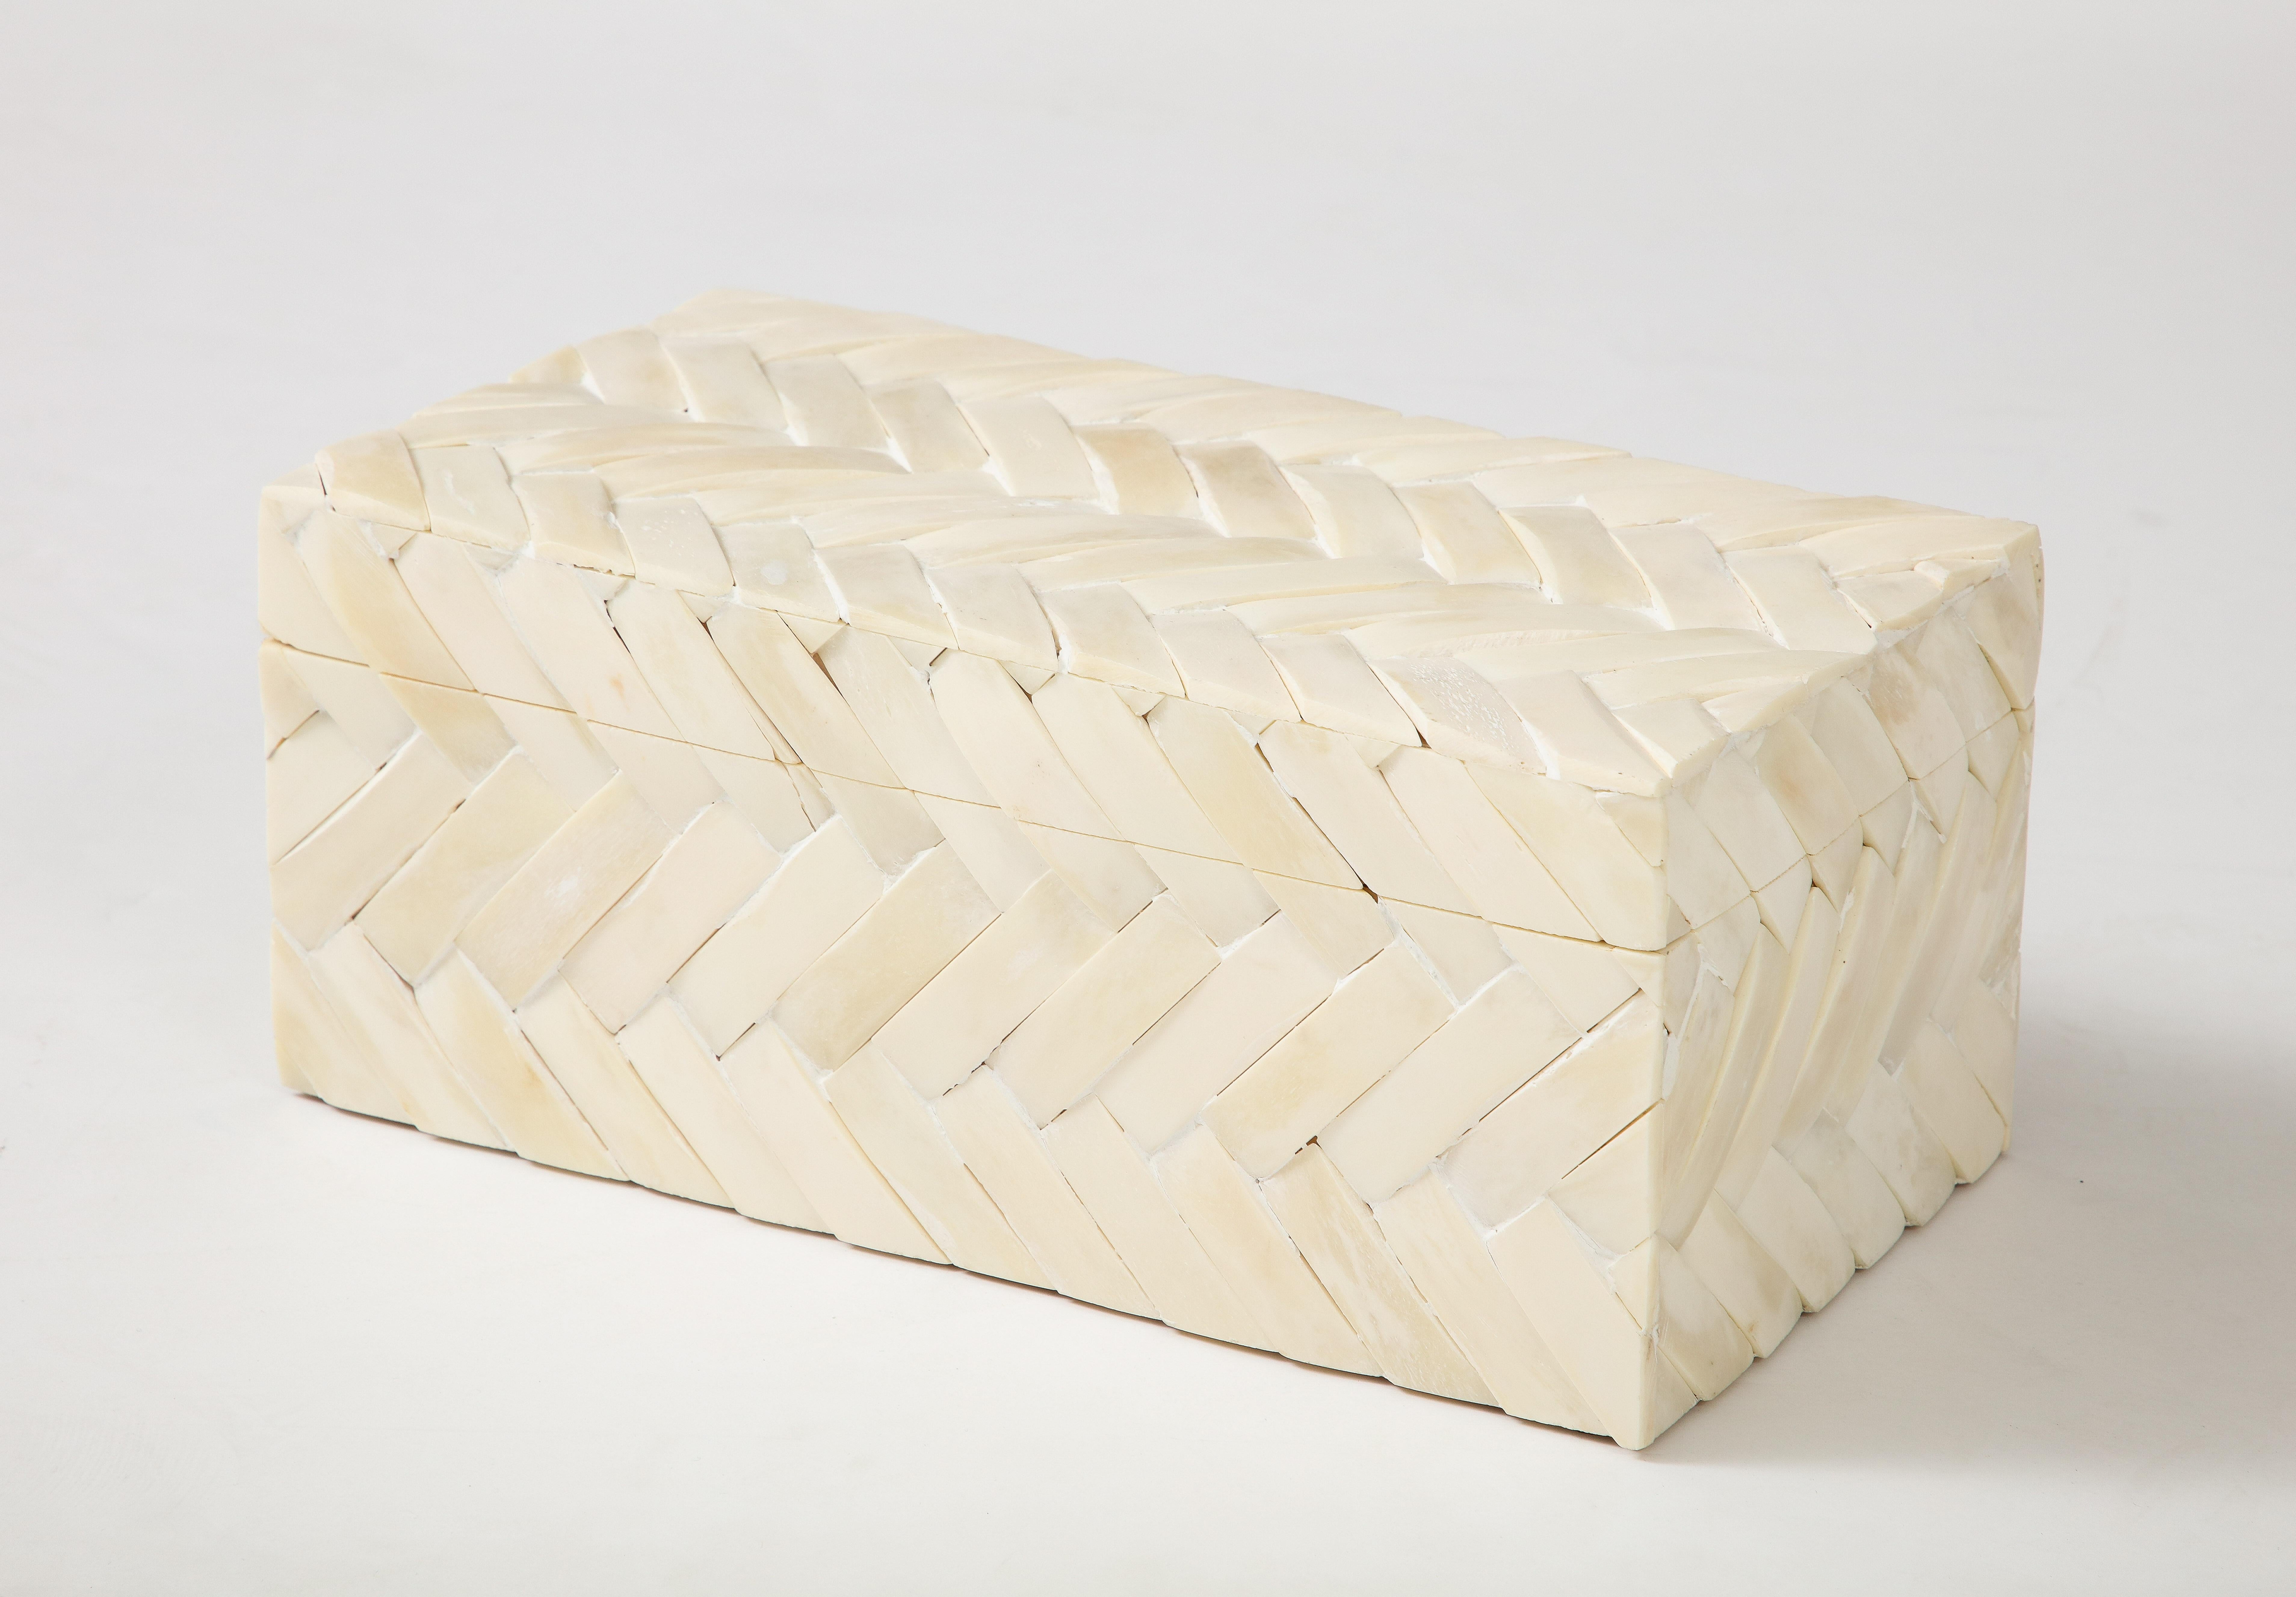 Contemporary document, keepsake box featuring bone tiles in a cheveron pattern over a wood structure. A great solution for remote control storage, or as a desk accessory.